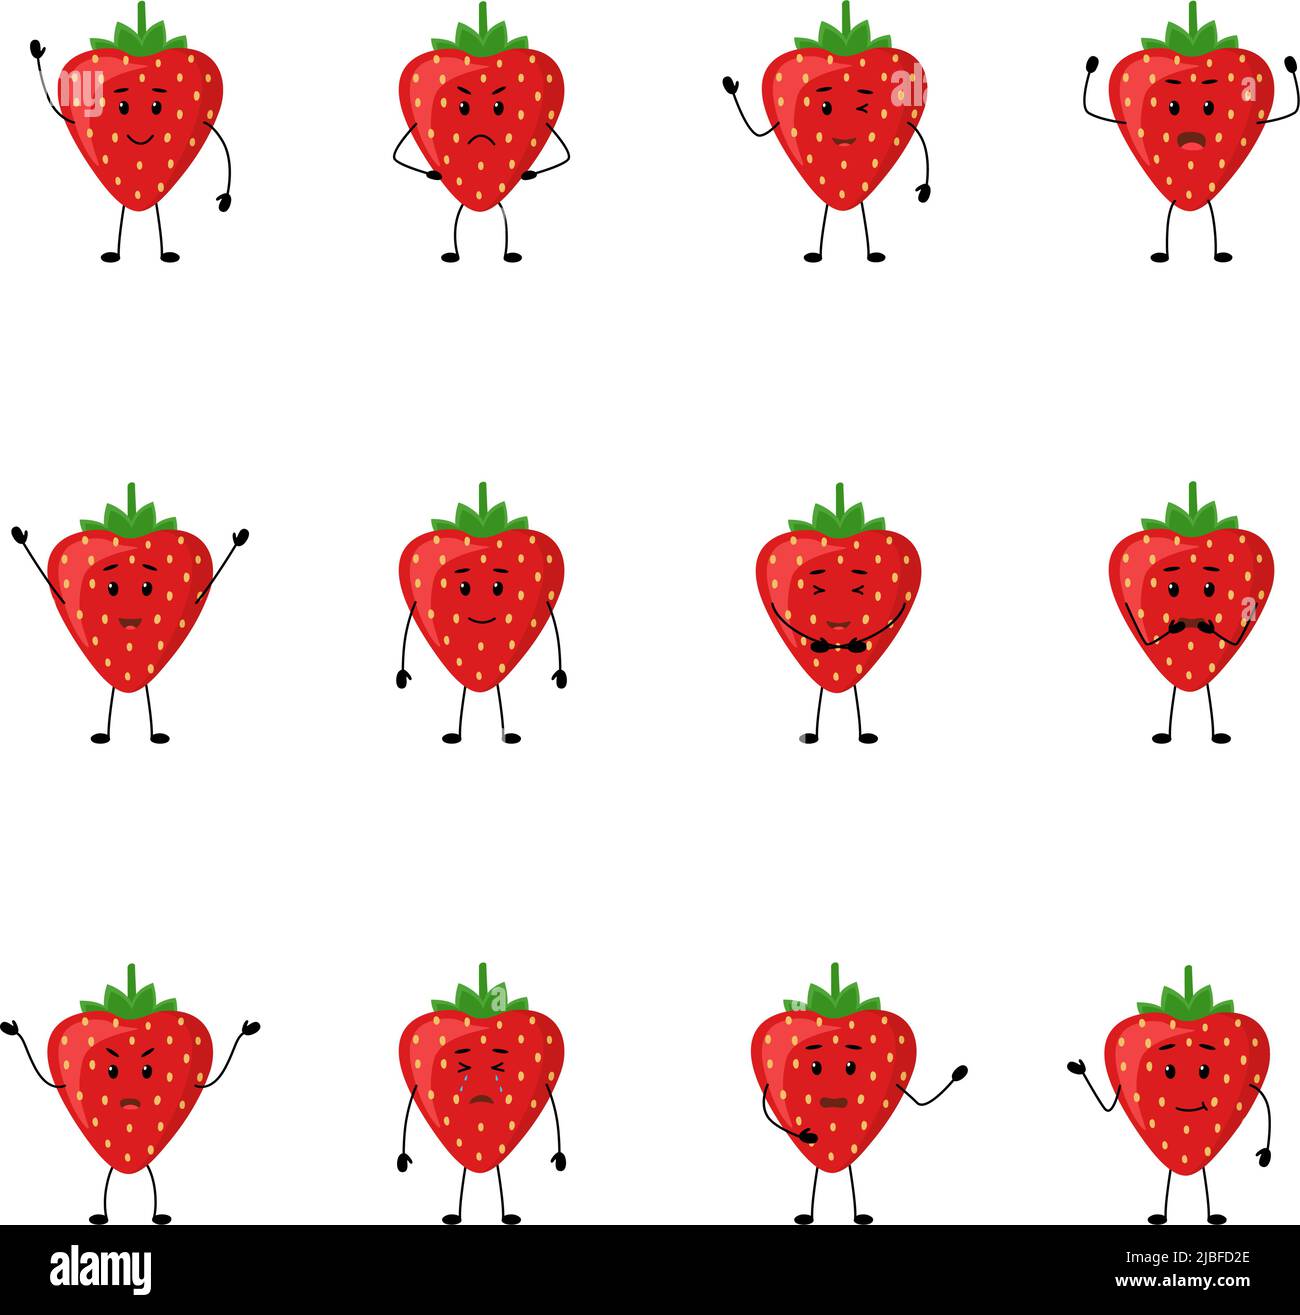 Emotional Support Strawberries look how cute they are, everyone will